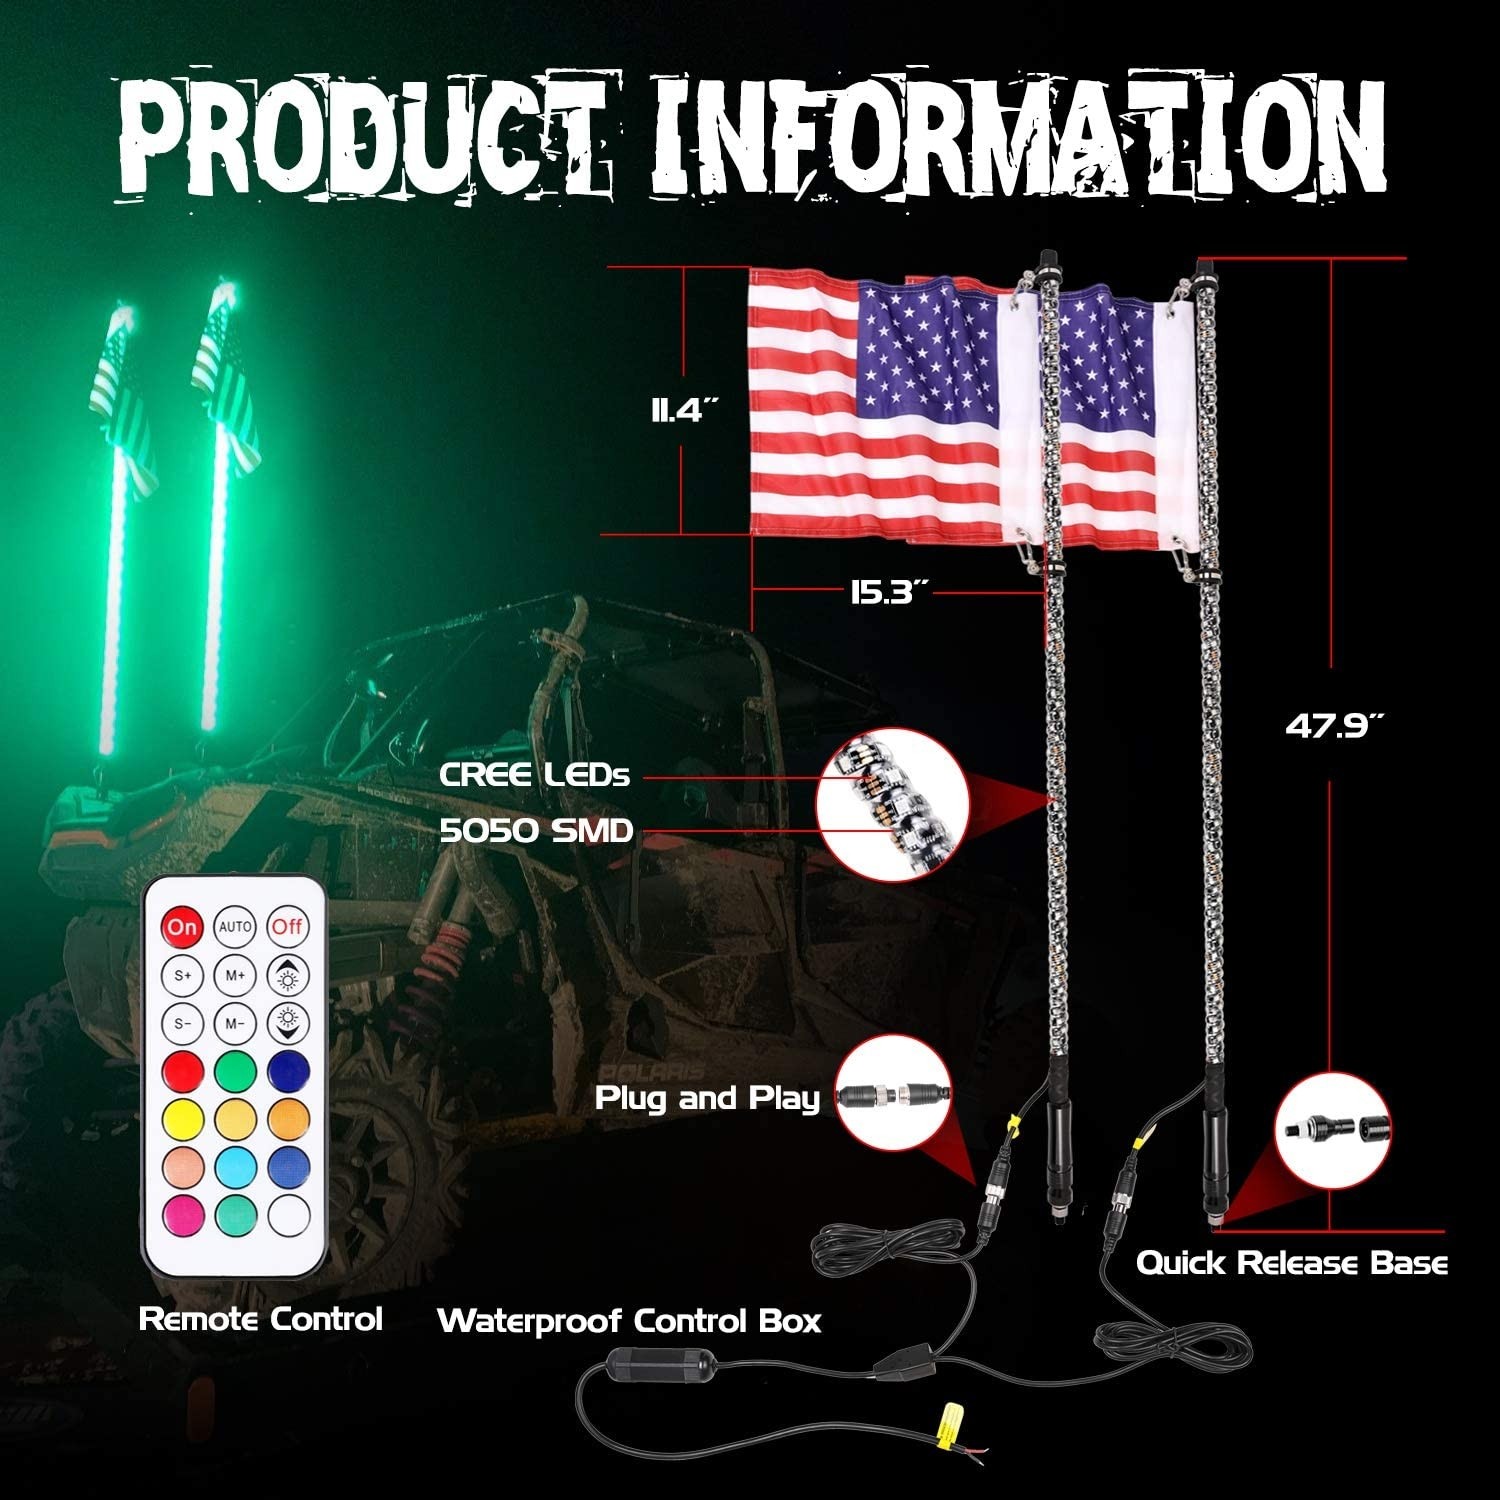 Bestauto Led Whip Lights Spiral RGB Color Lighted Whips for UTV Dancing/Chasing Led CB Antenna 4ft 2pcs Off-Road Whips Remote Wireless Control LED Whips for Sand Dune UTV ATV Polaris Accessories Jeep 